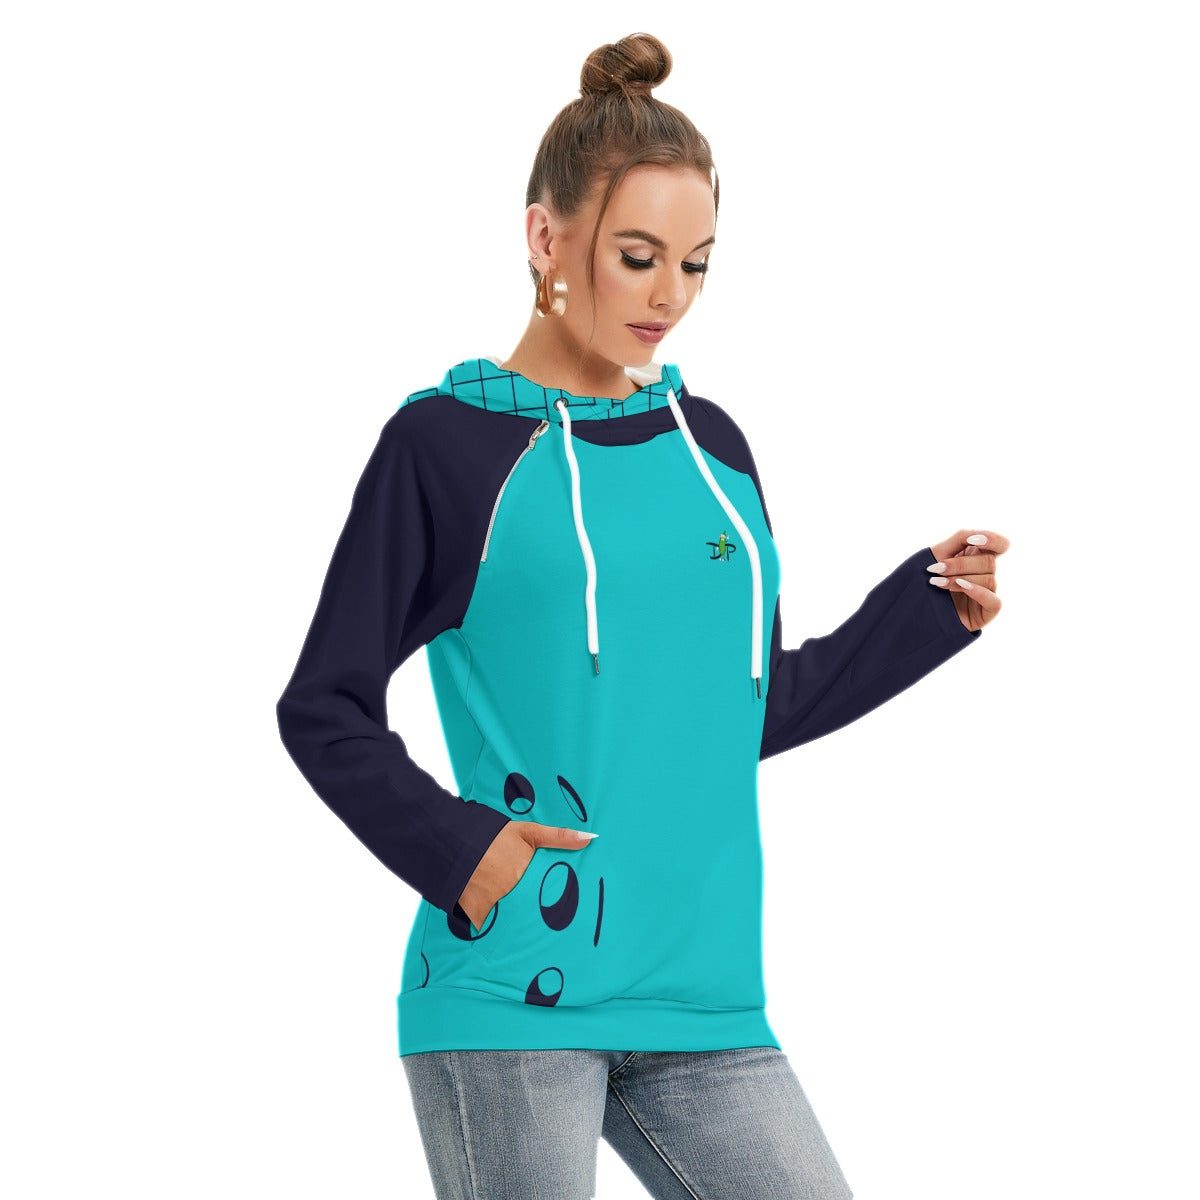 Lisa - Blue/Teal - Ball - Double Hat Hoodie by Dizzy Pickle